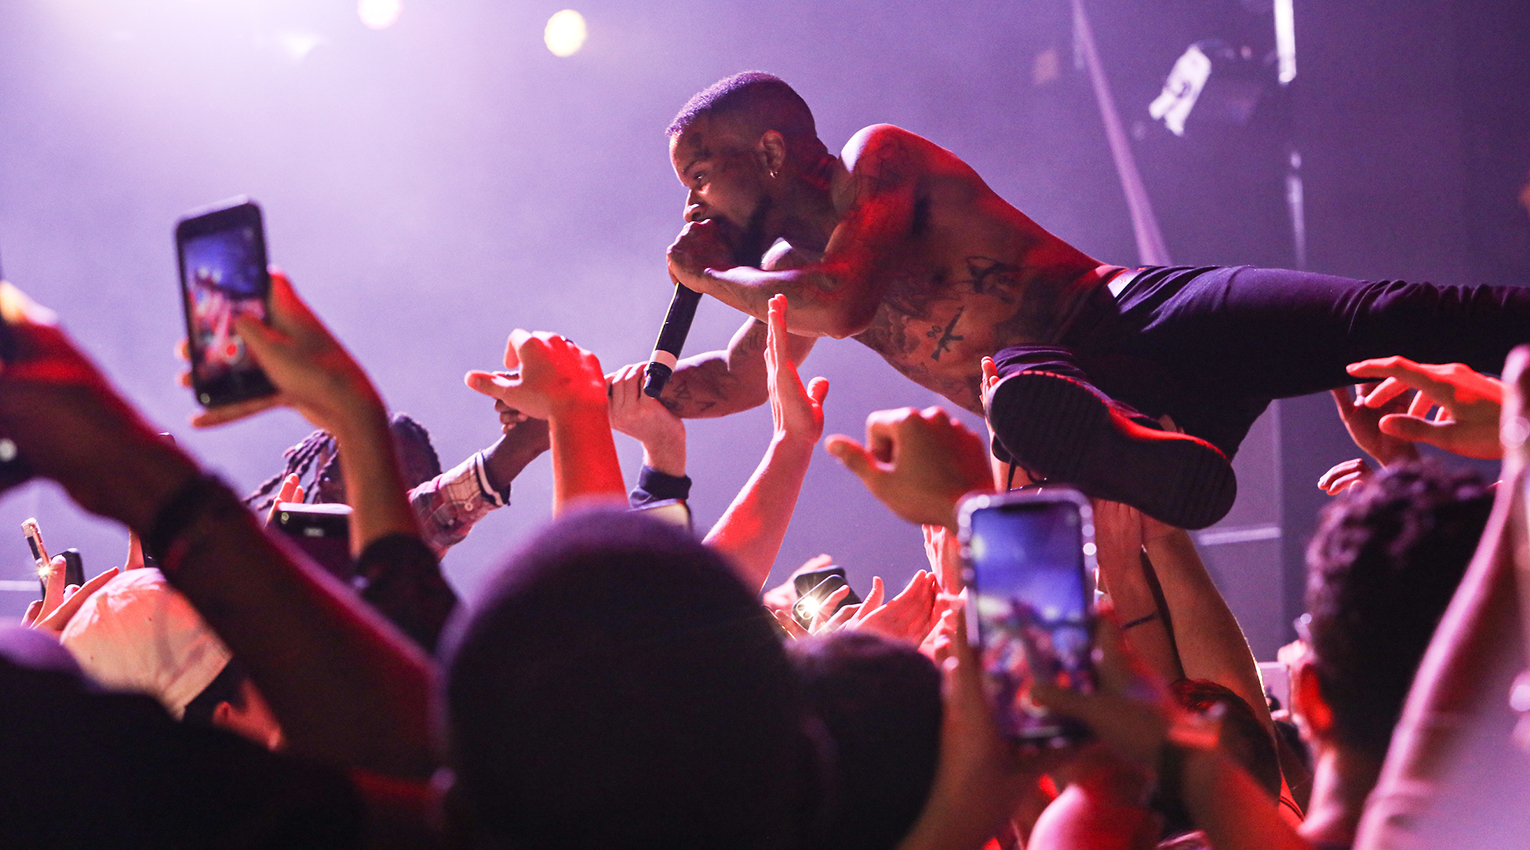 Rapper Tory Lanez crowdsurfing during his performance at Suffolk's Fall concert